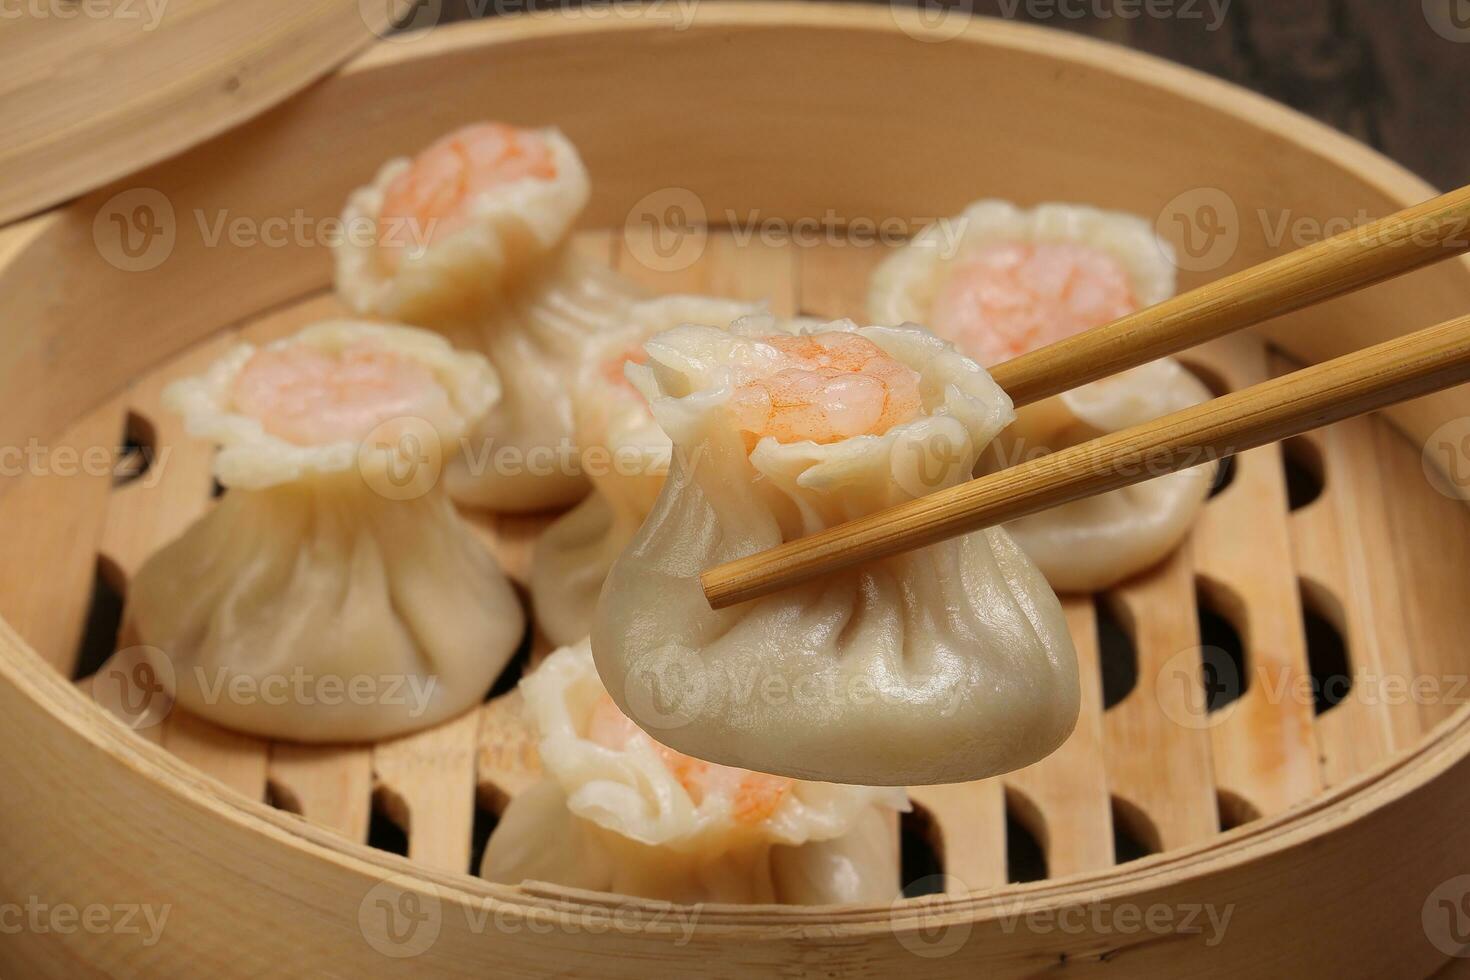 Prawn shrimp shaomai dim sum dumpling picked up by chopsticks in bamboo steamer on rustic wood background photo